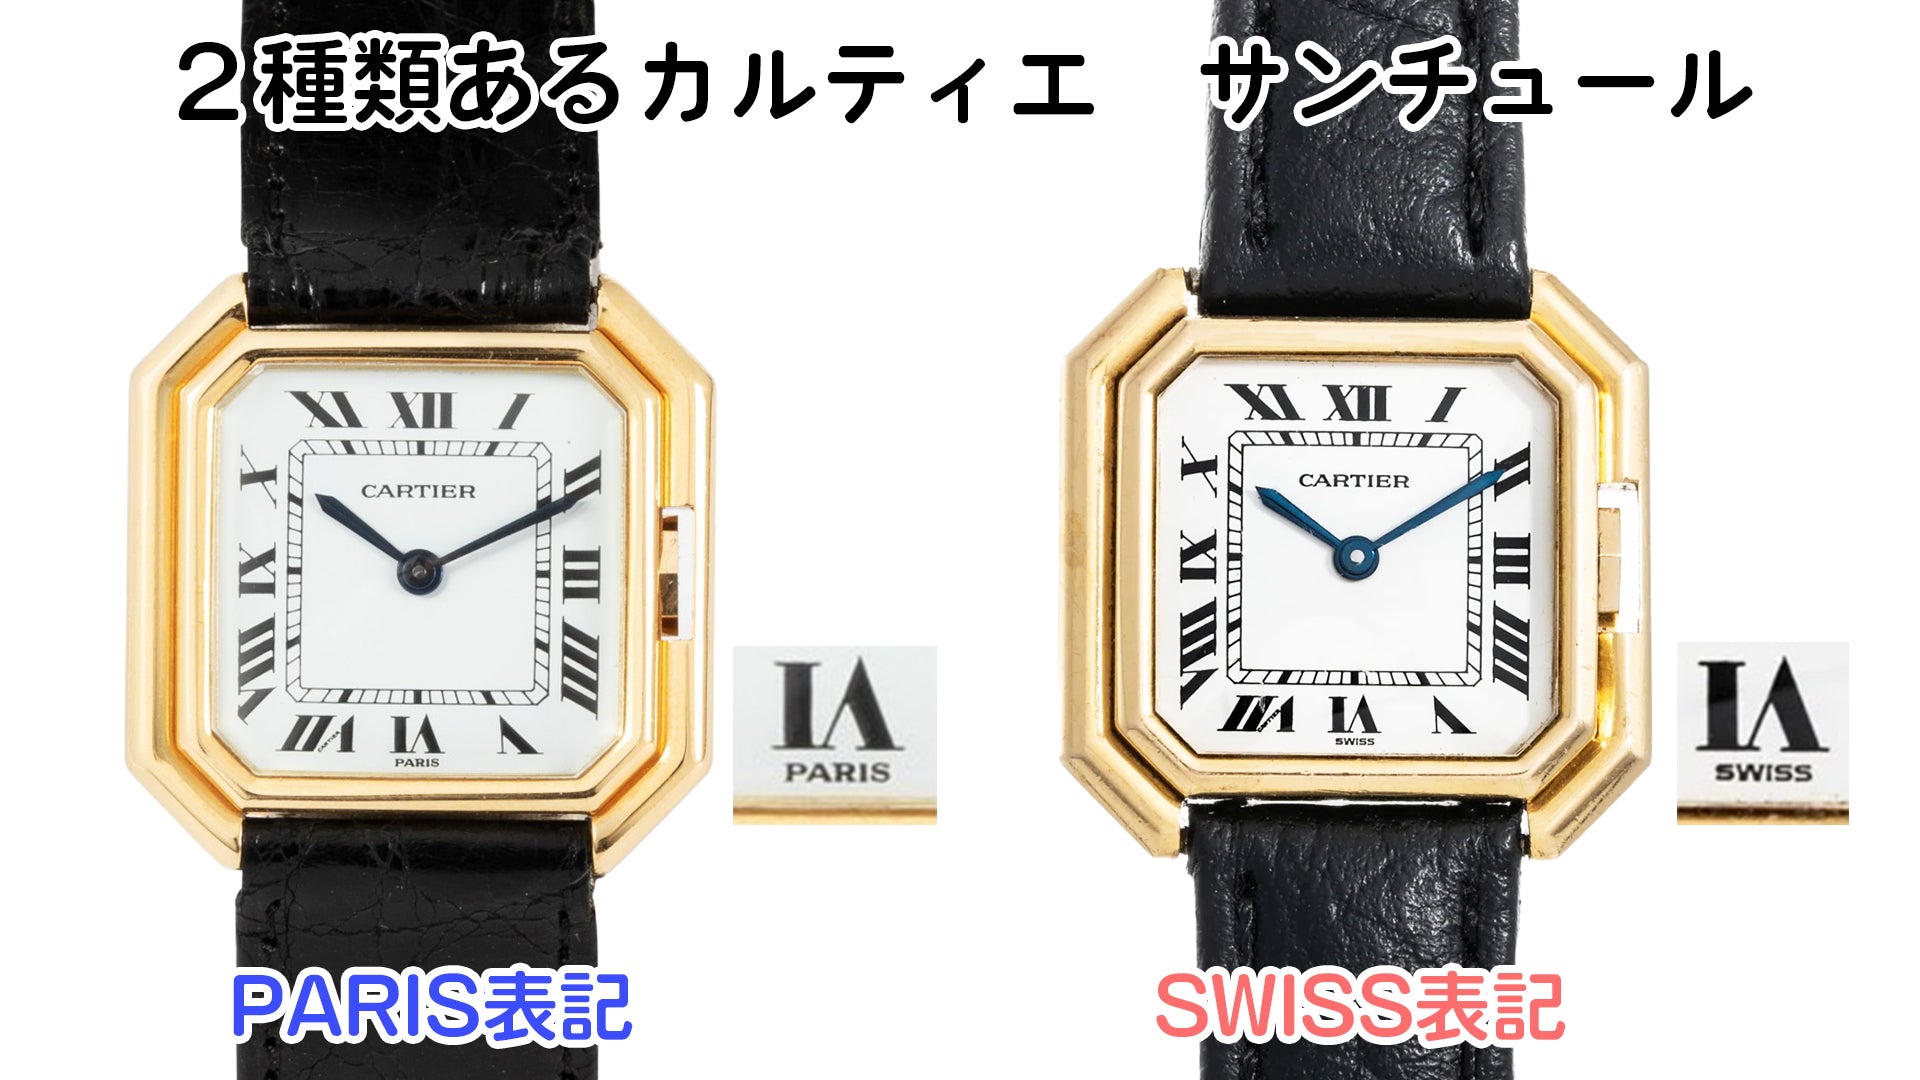 There are two types of Cartier Santur: PARIS and SWISS